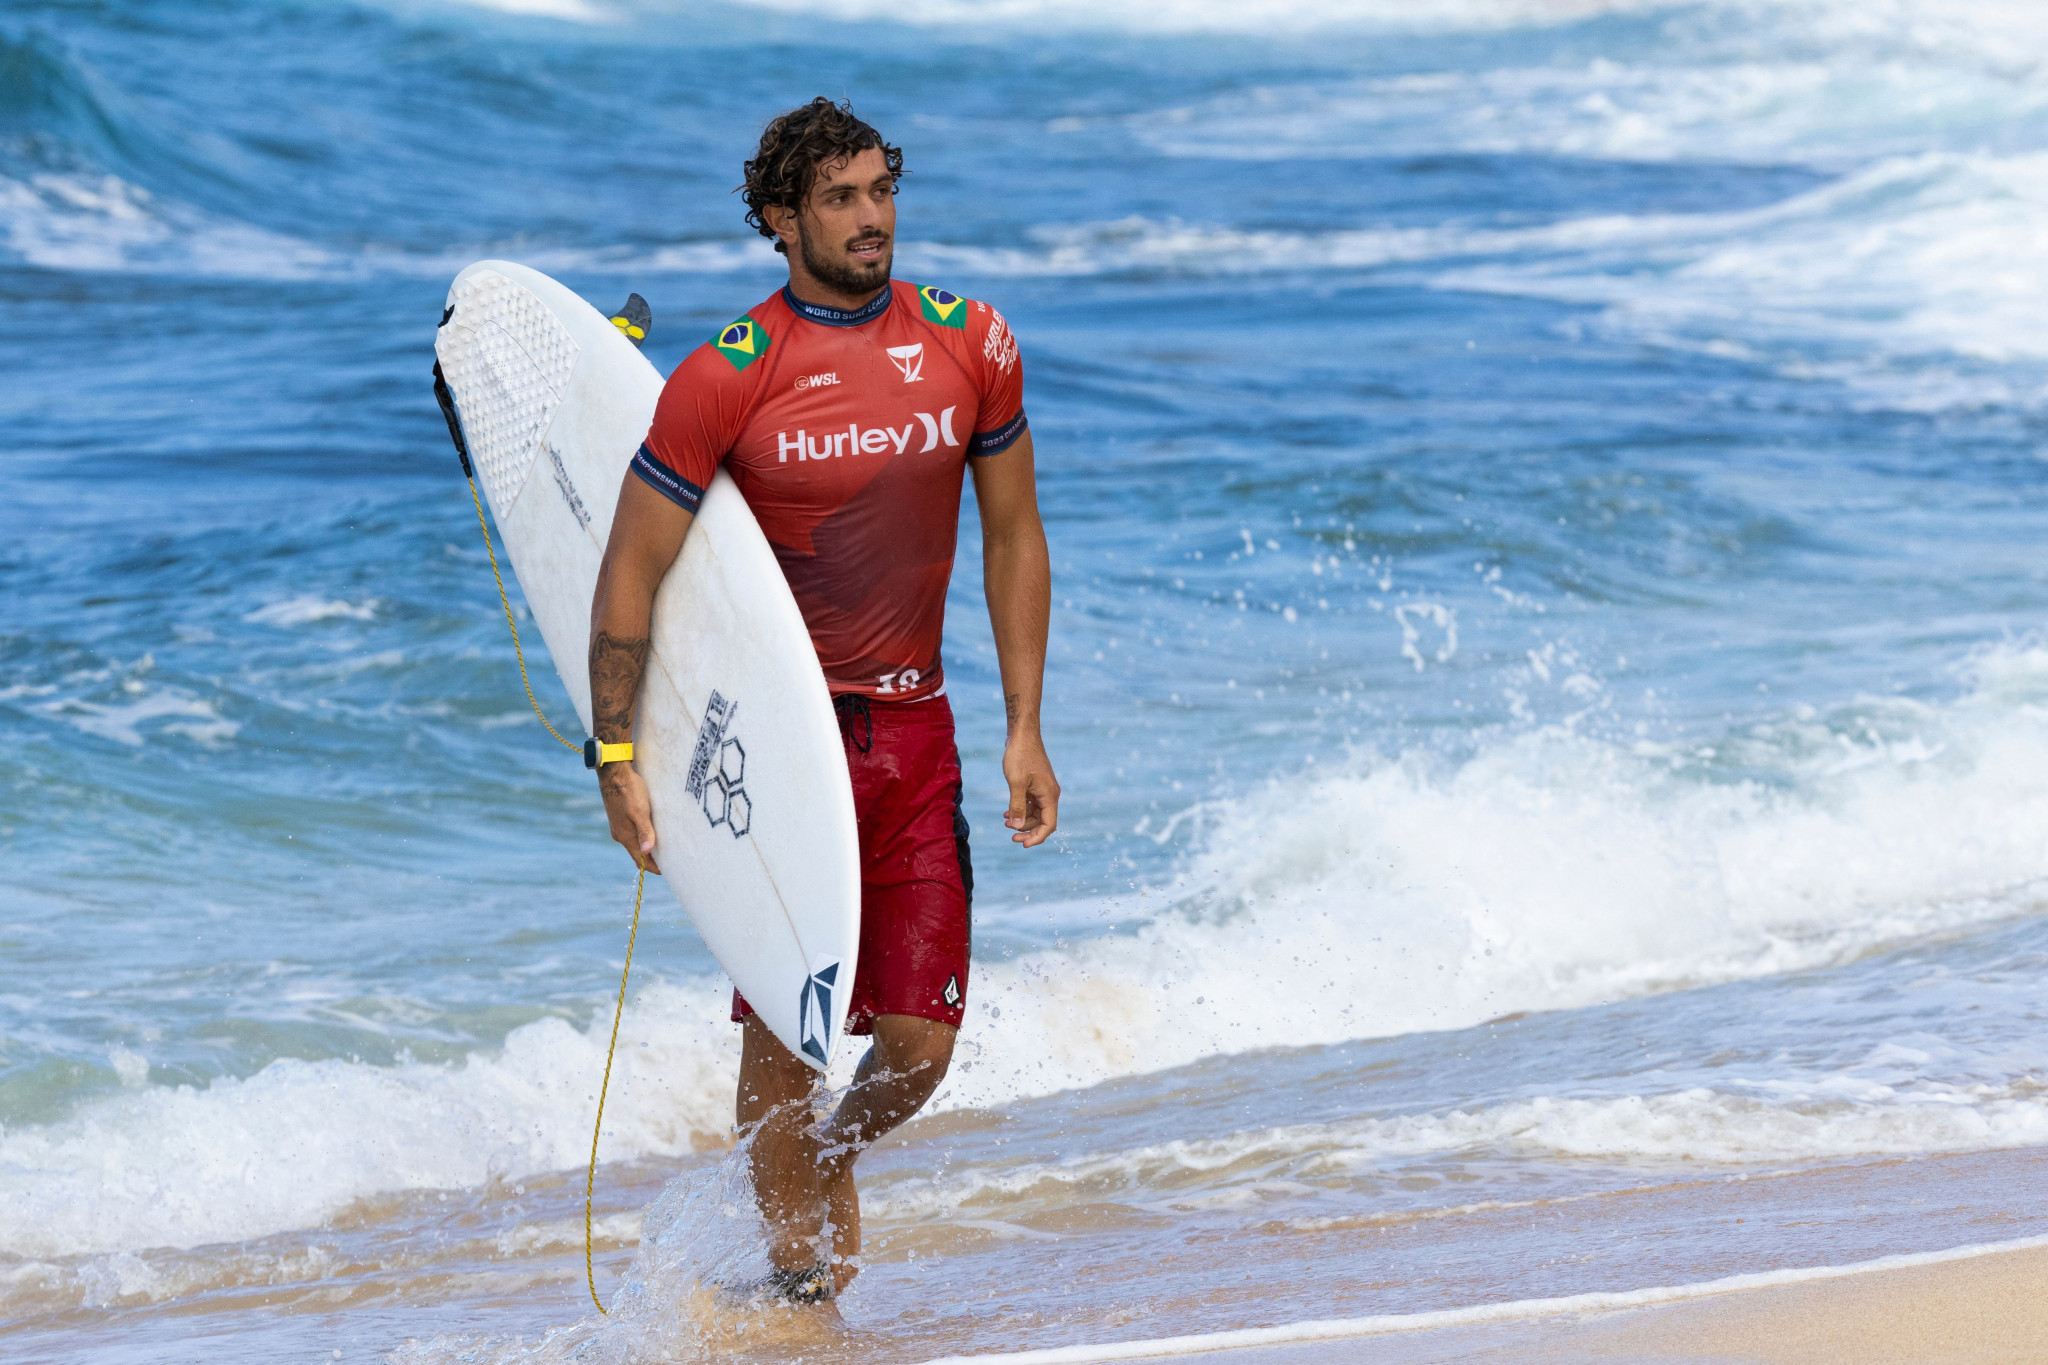 João Chianca Is second in the standings of the World Surf League after his victory in Portugal ©Getty Images